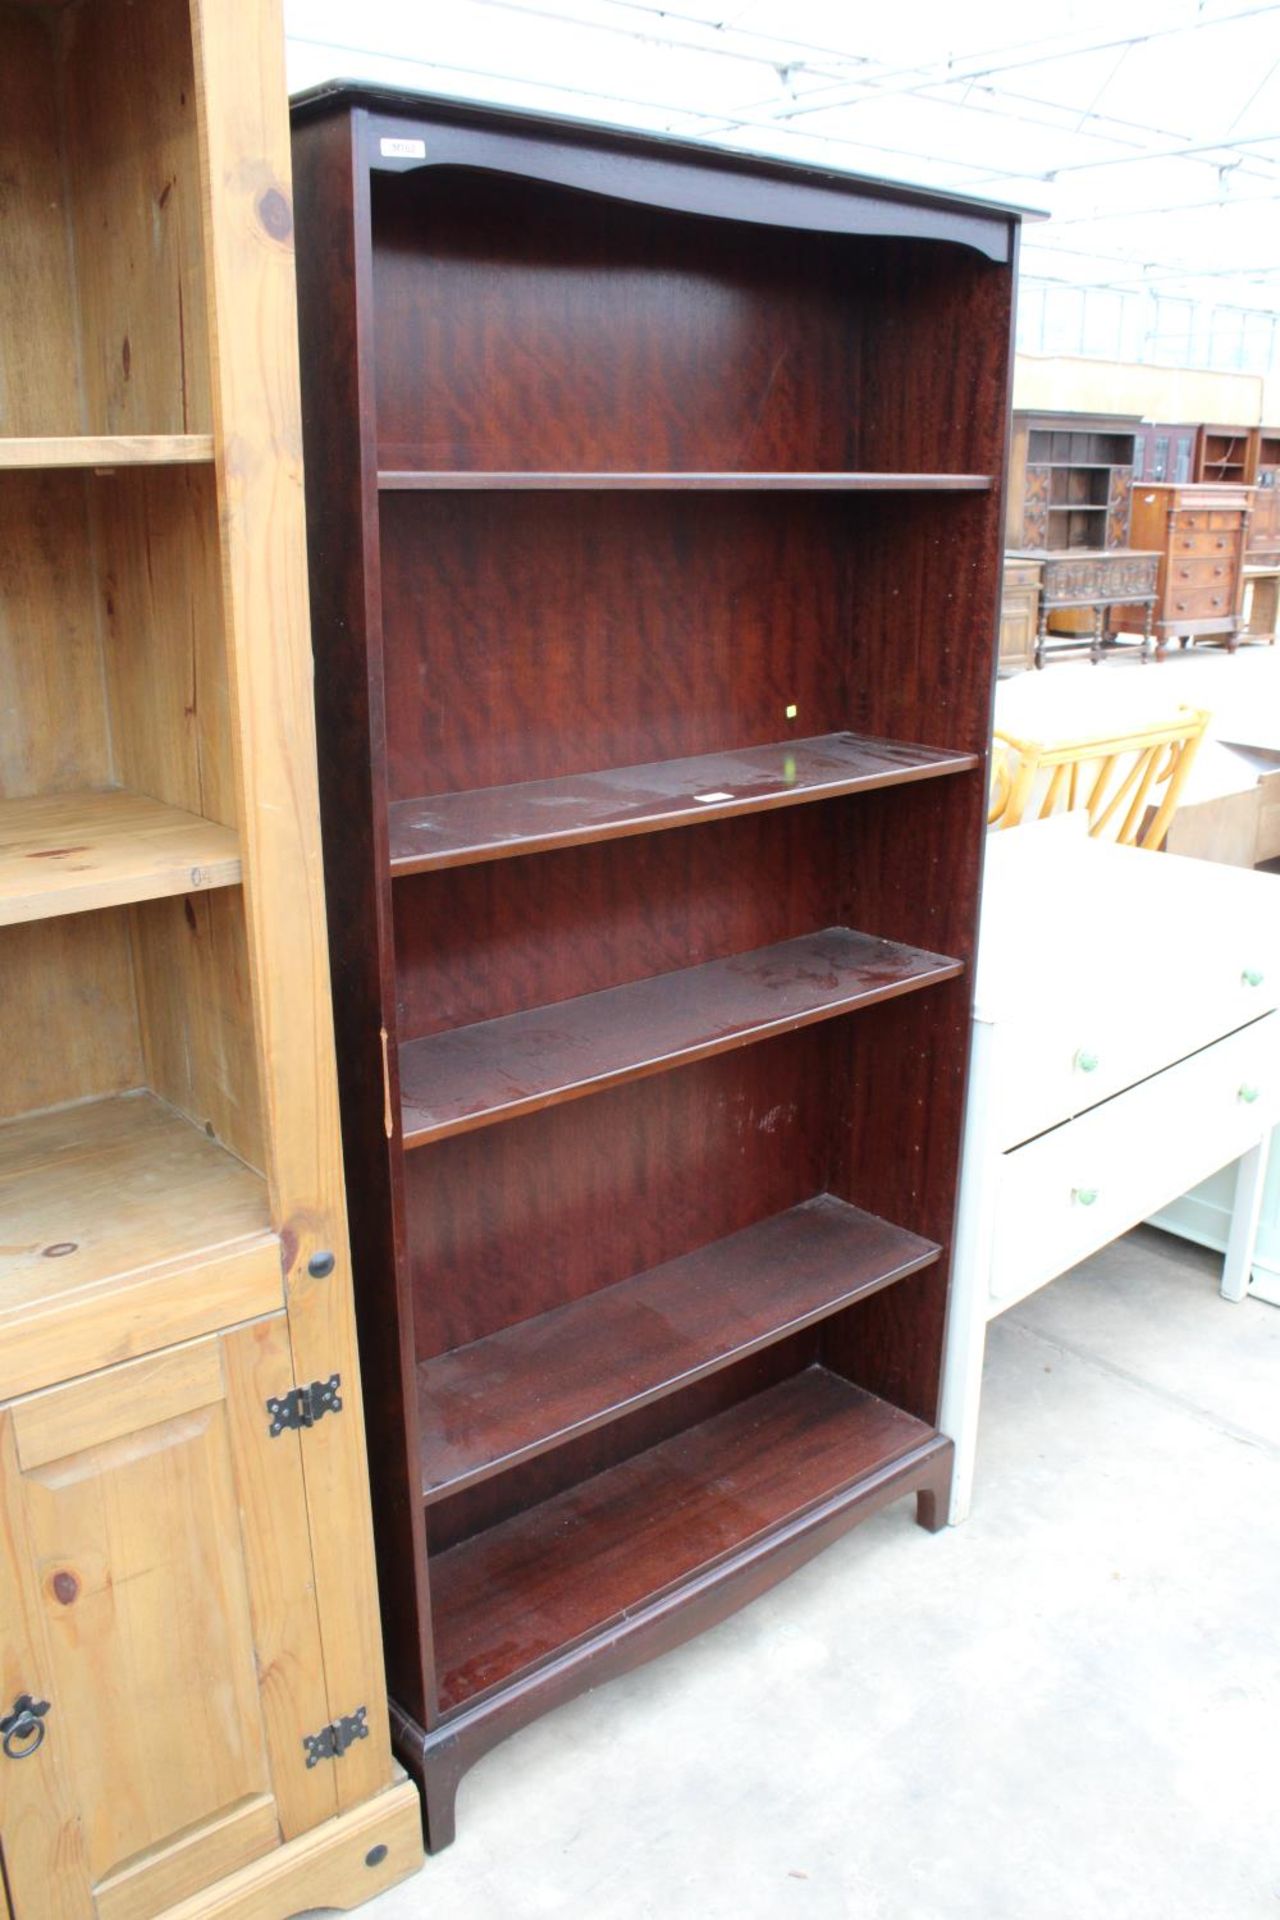 A MODERN FIVE TIER OPEN STAG BOOKCASE, 35" WIDE